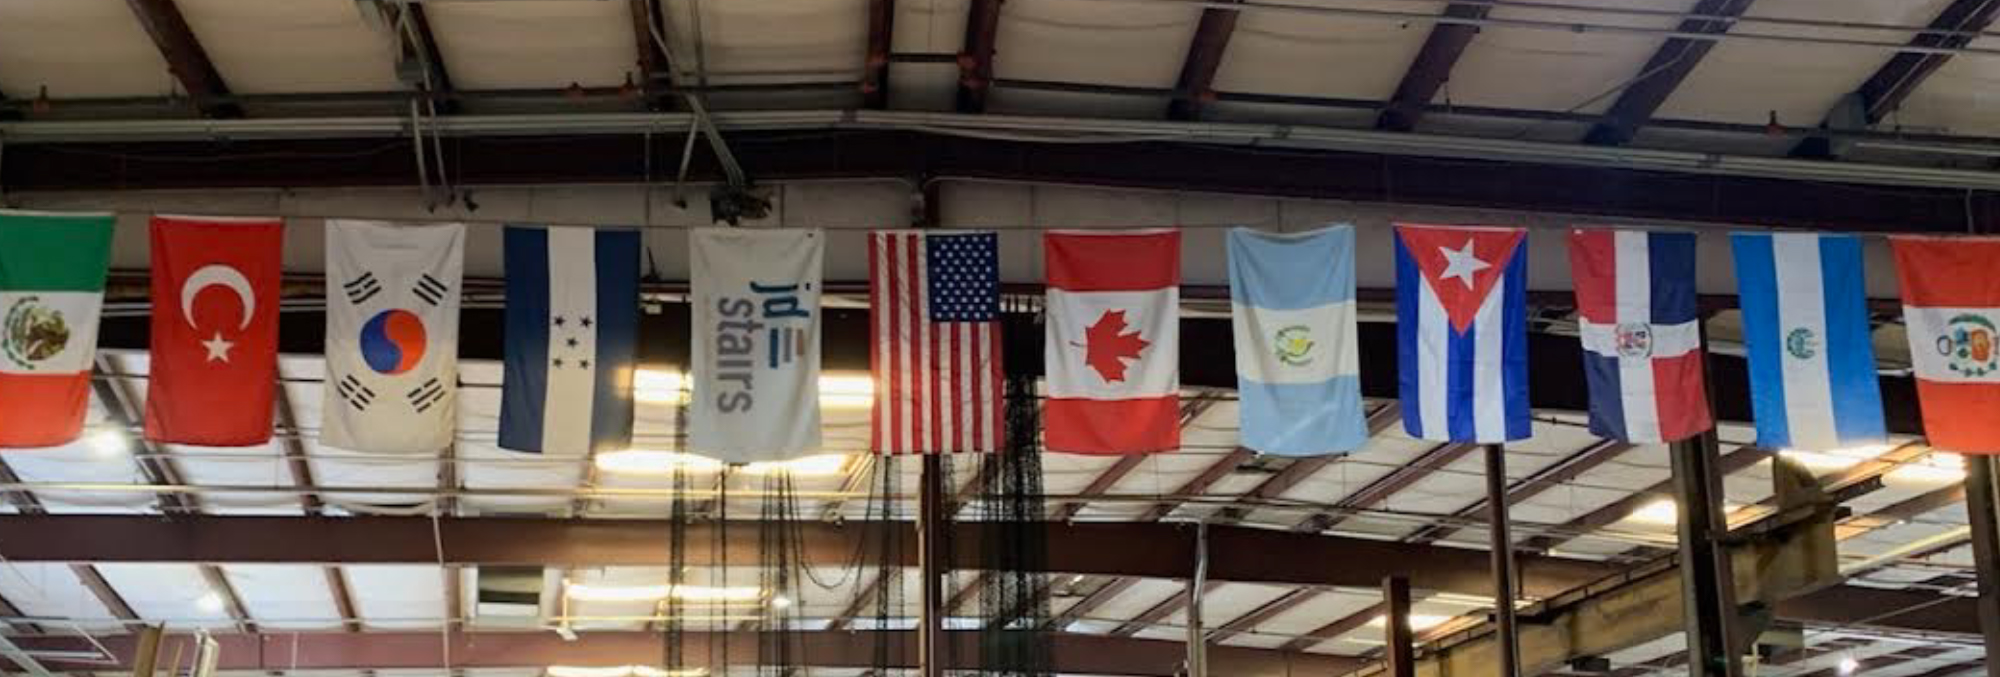 International flags hung in rafters, JD Stairs has a very diverse culture inside the company.